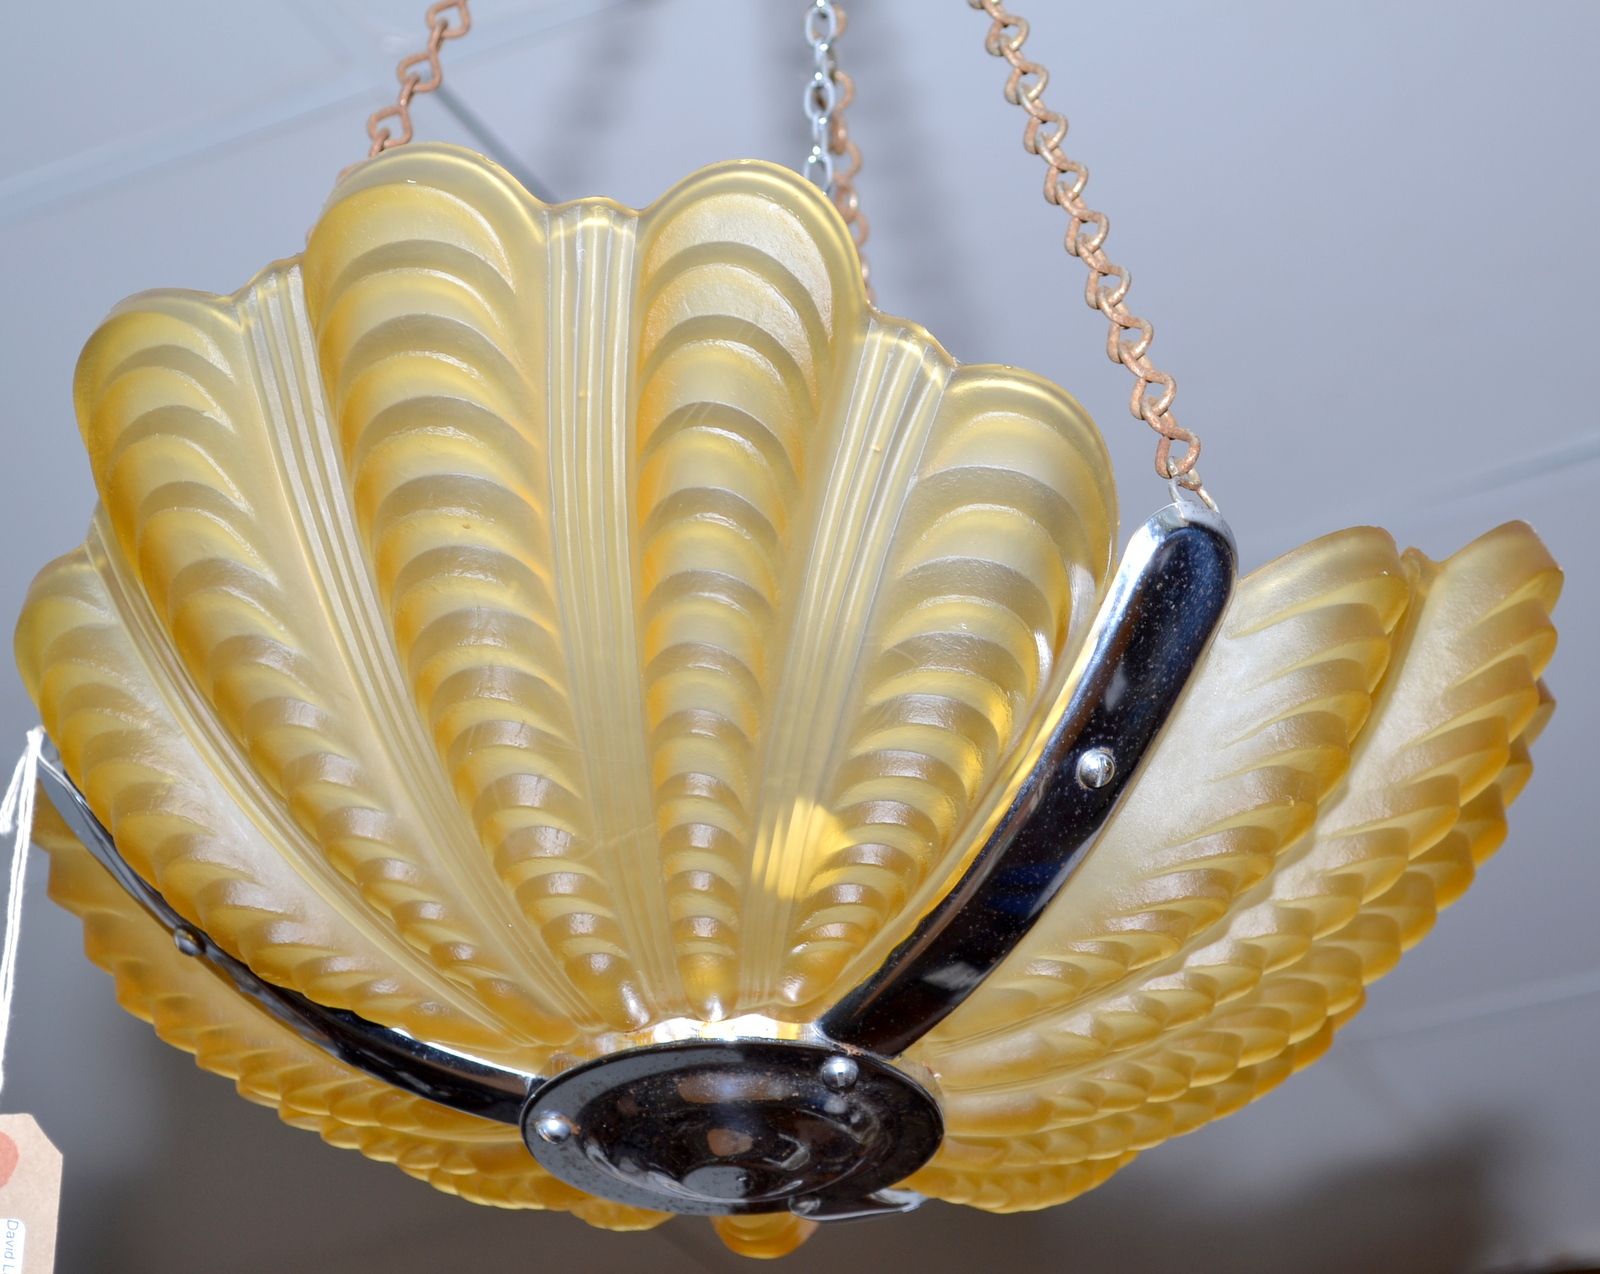 An Art Deco shell moulded, triple amber glass pendant light fitting with chrome frame.  Condition